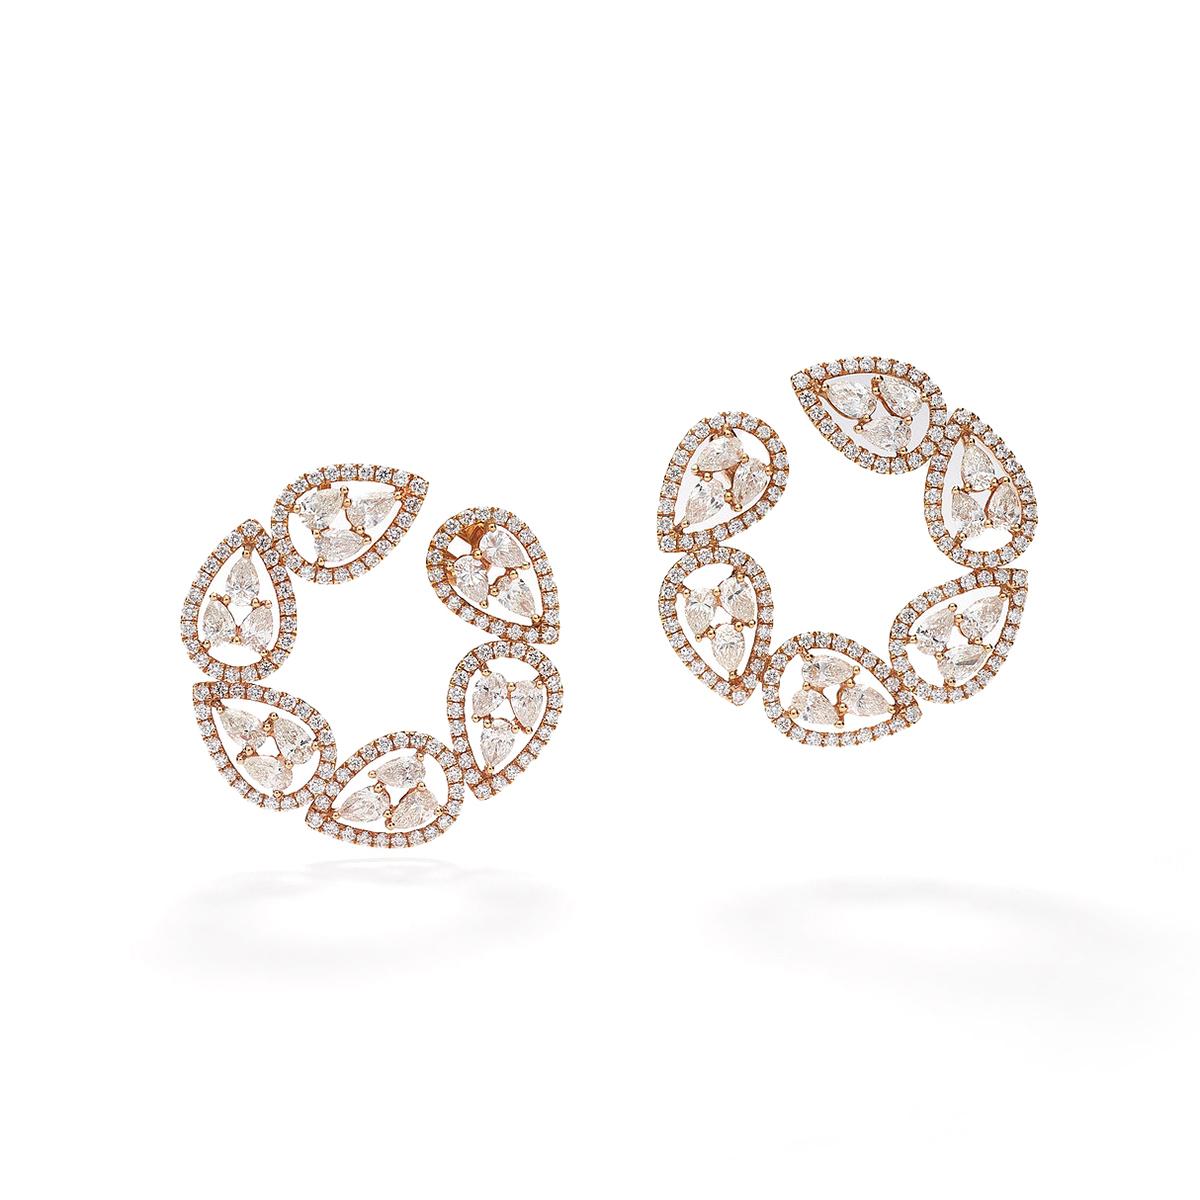 Earrings in 18kt pink gold set with 300 pear- shaped diamonds and diamonds 6.09 cts